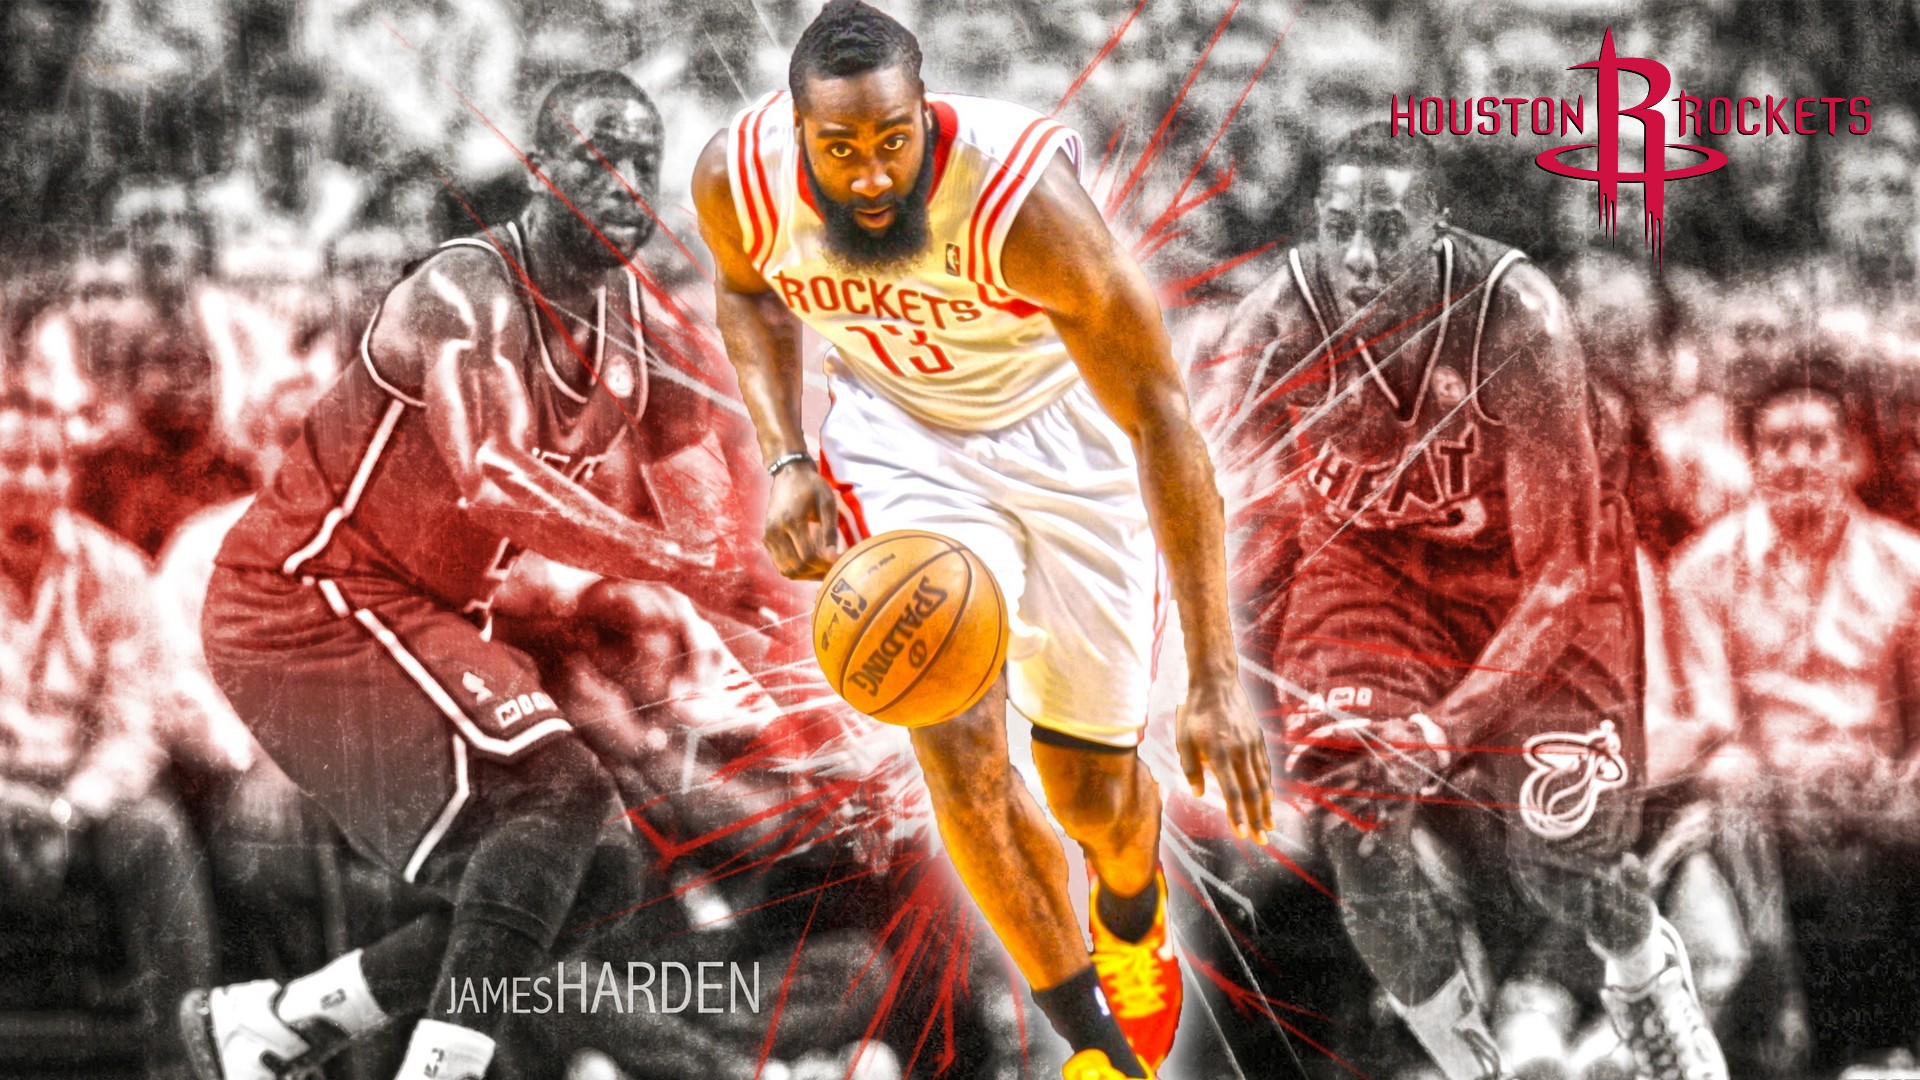 James Harden Wallpaper HD with image dimensions 1920x1080 pixel. You can make this wallpaper for your Desktop Computer Backgrounds, Windows or Mac Screensavers, iPhone Lock screen, Tablet or Android and another Mobile Phone device